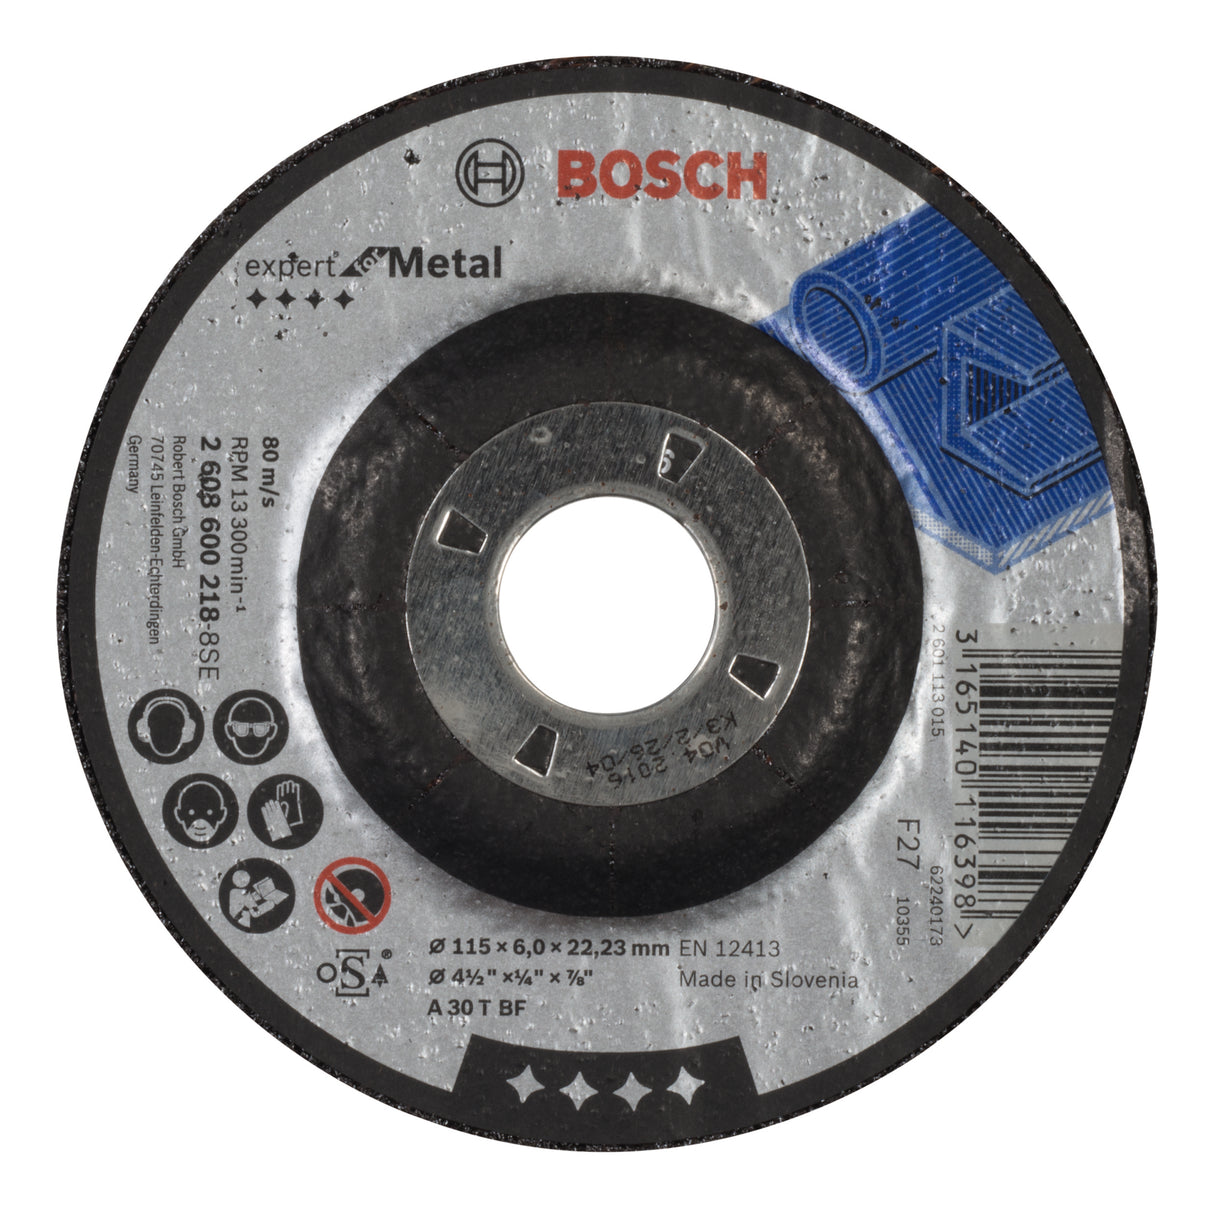 Bosch Professional Expert Metal Grinding Disc with Depressed Centre A 30 T BF, 115mm x 6.0mm